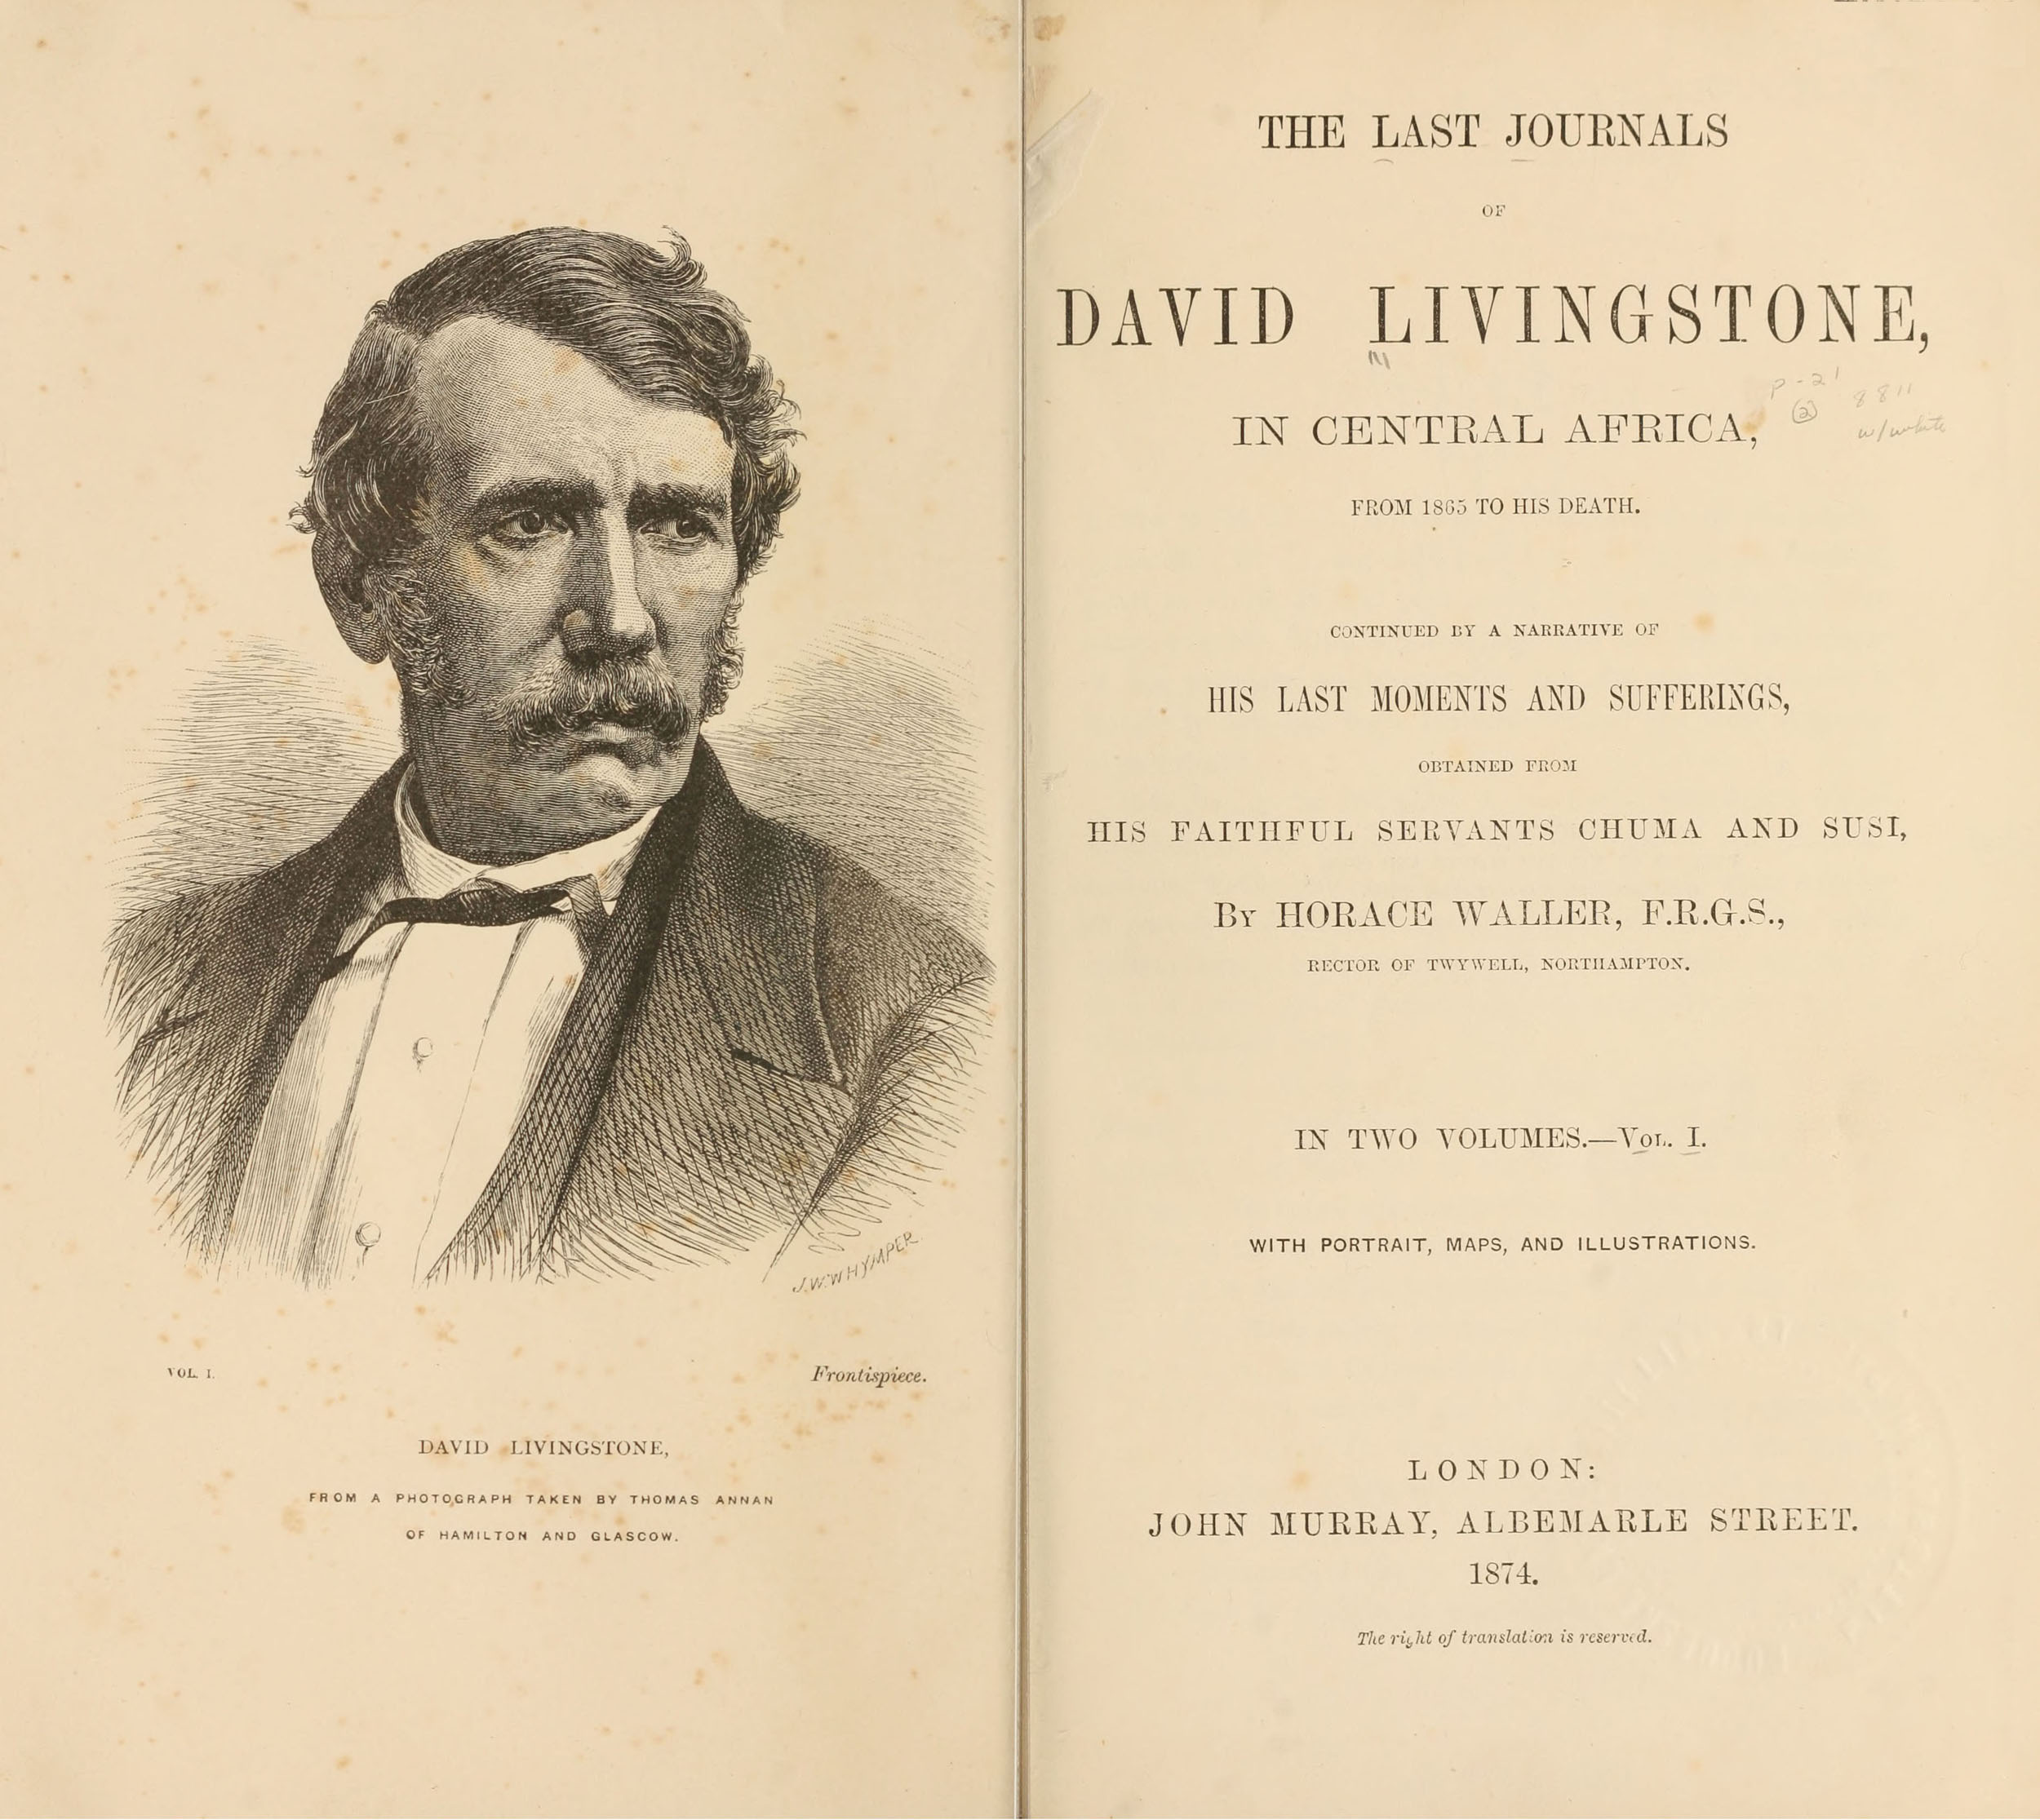 Frontispiece and title page from the Last Journals (Livingstone 1874,1). Courtesy of Internet Archive.